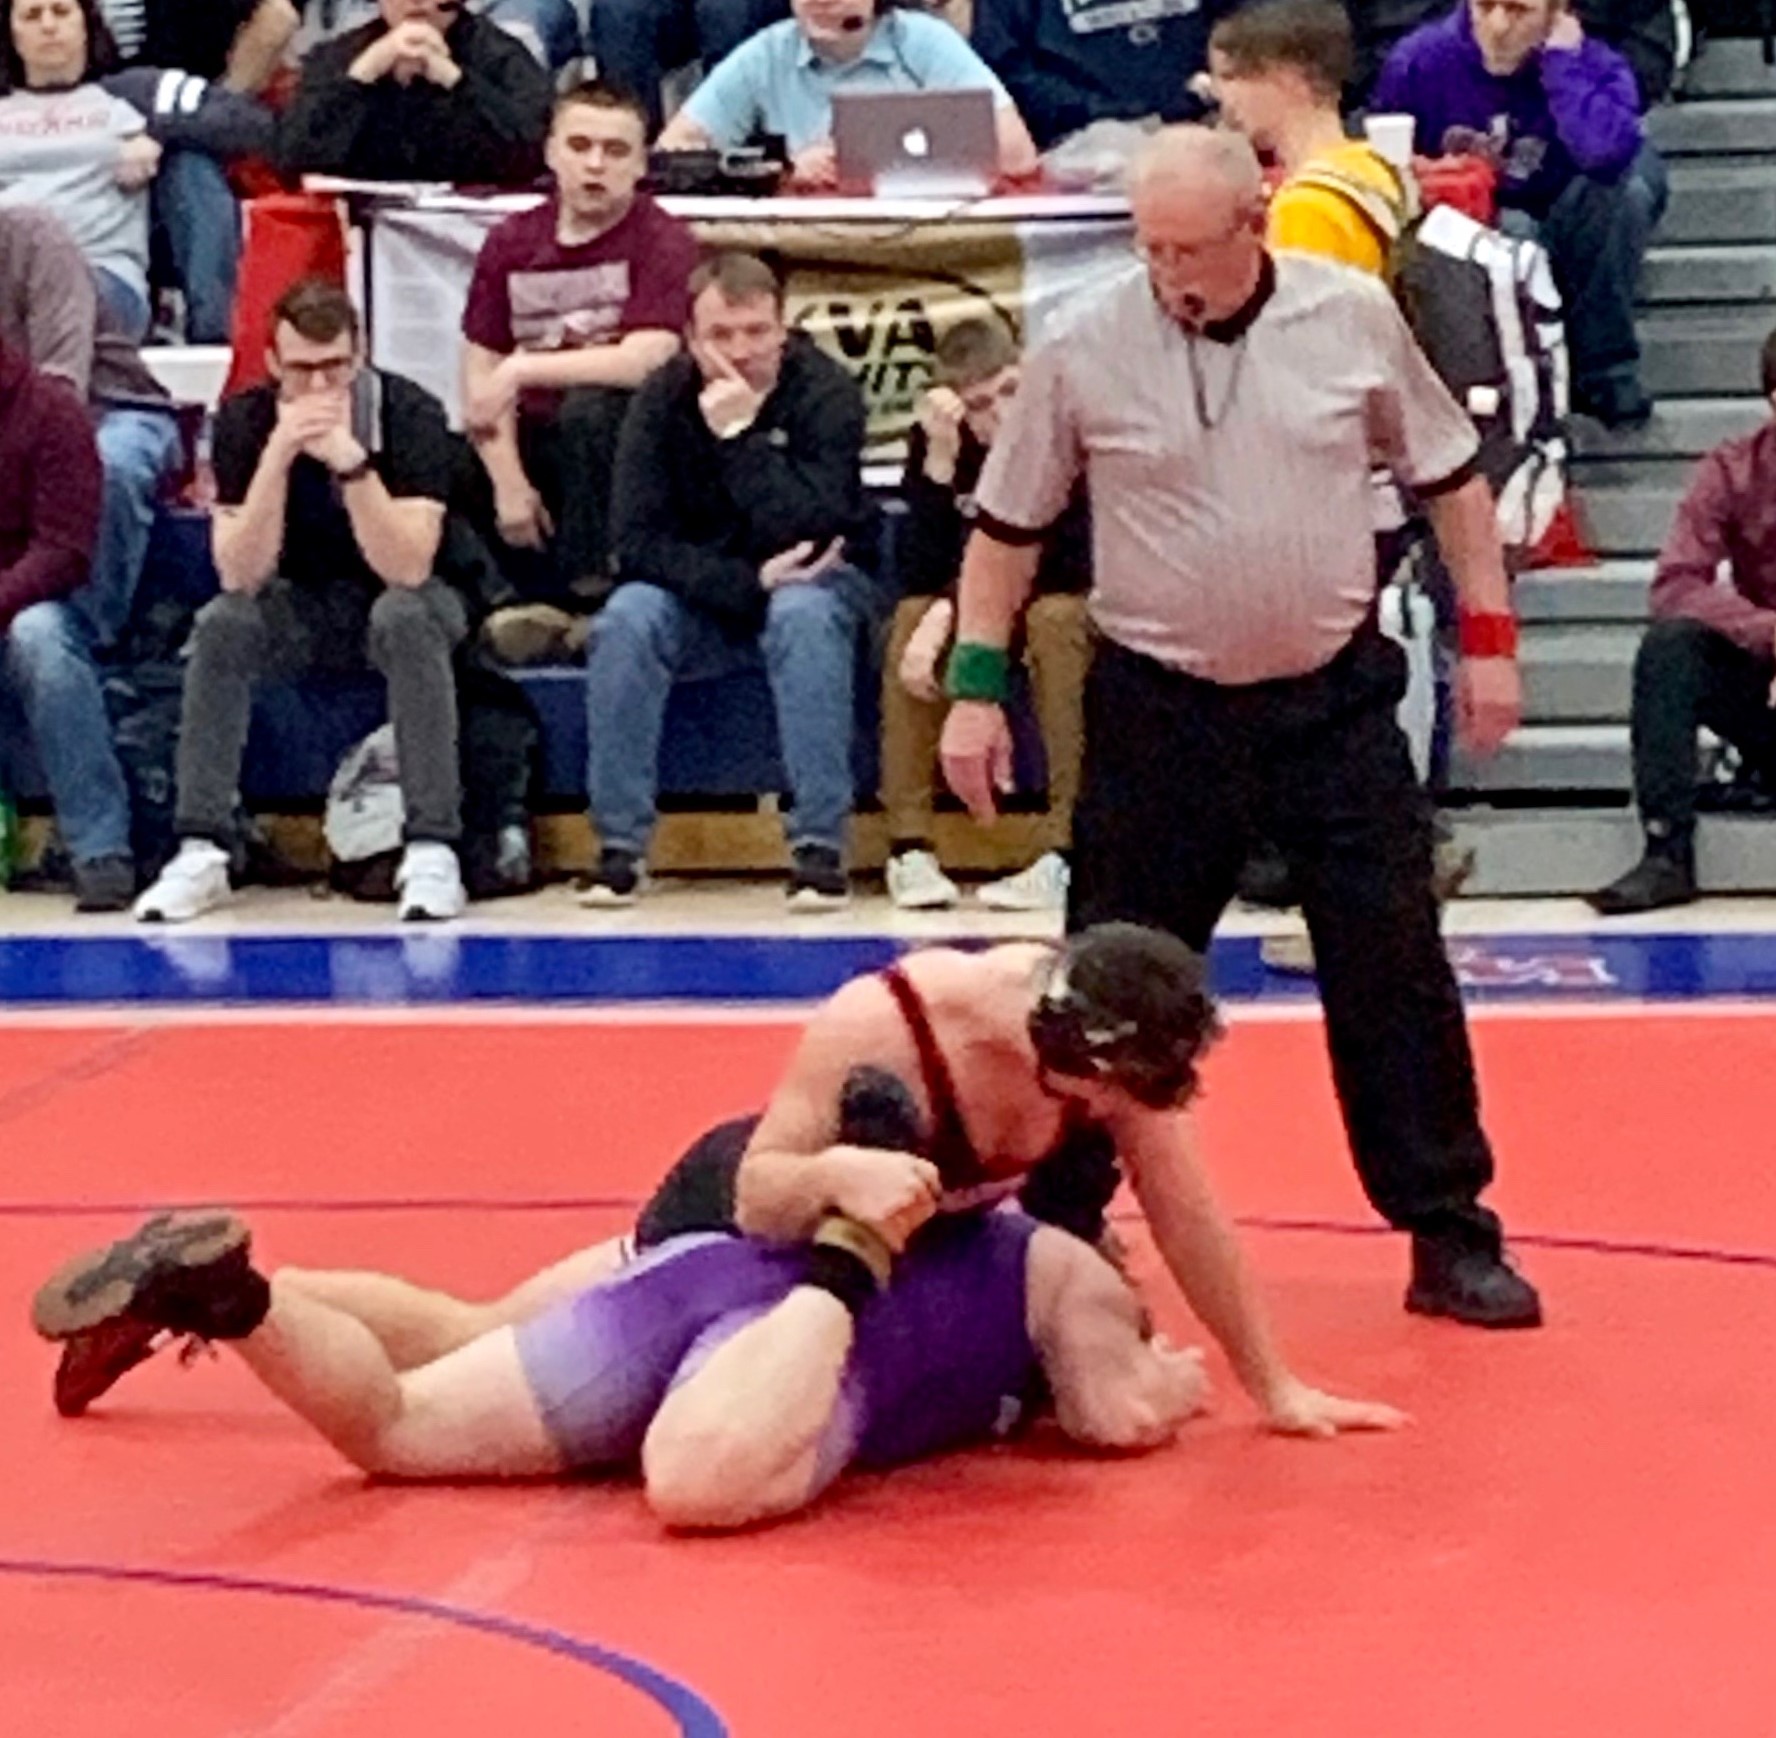 Oliver Billotte controls the action in winning his third place match